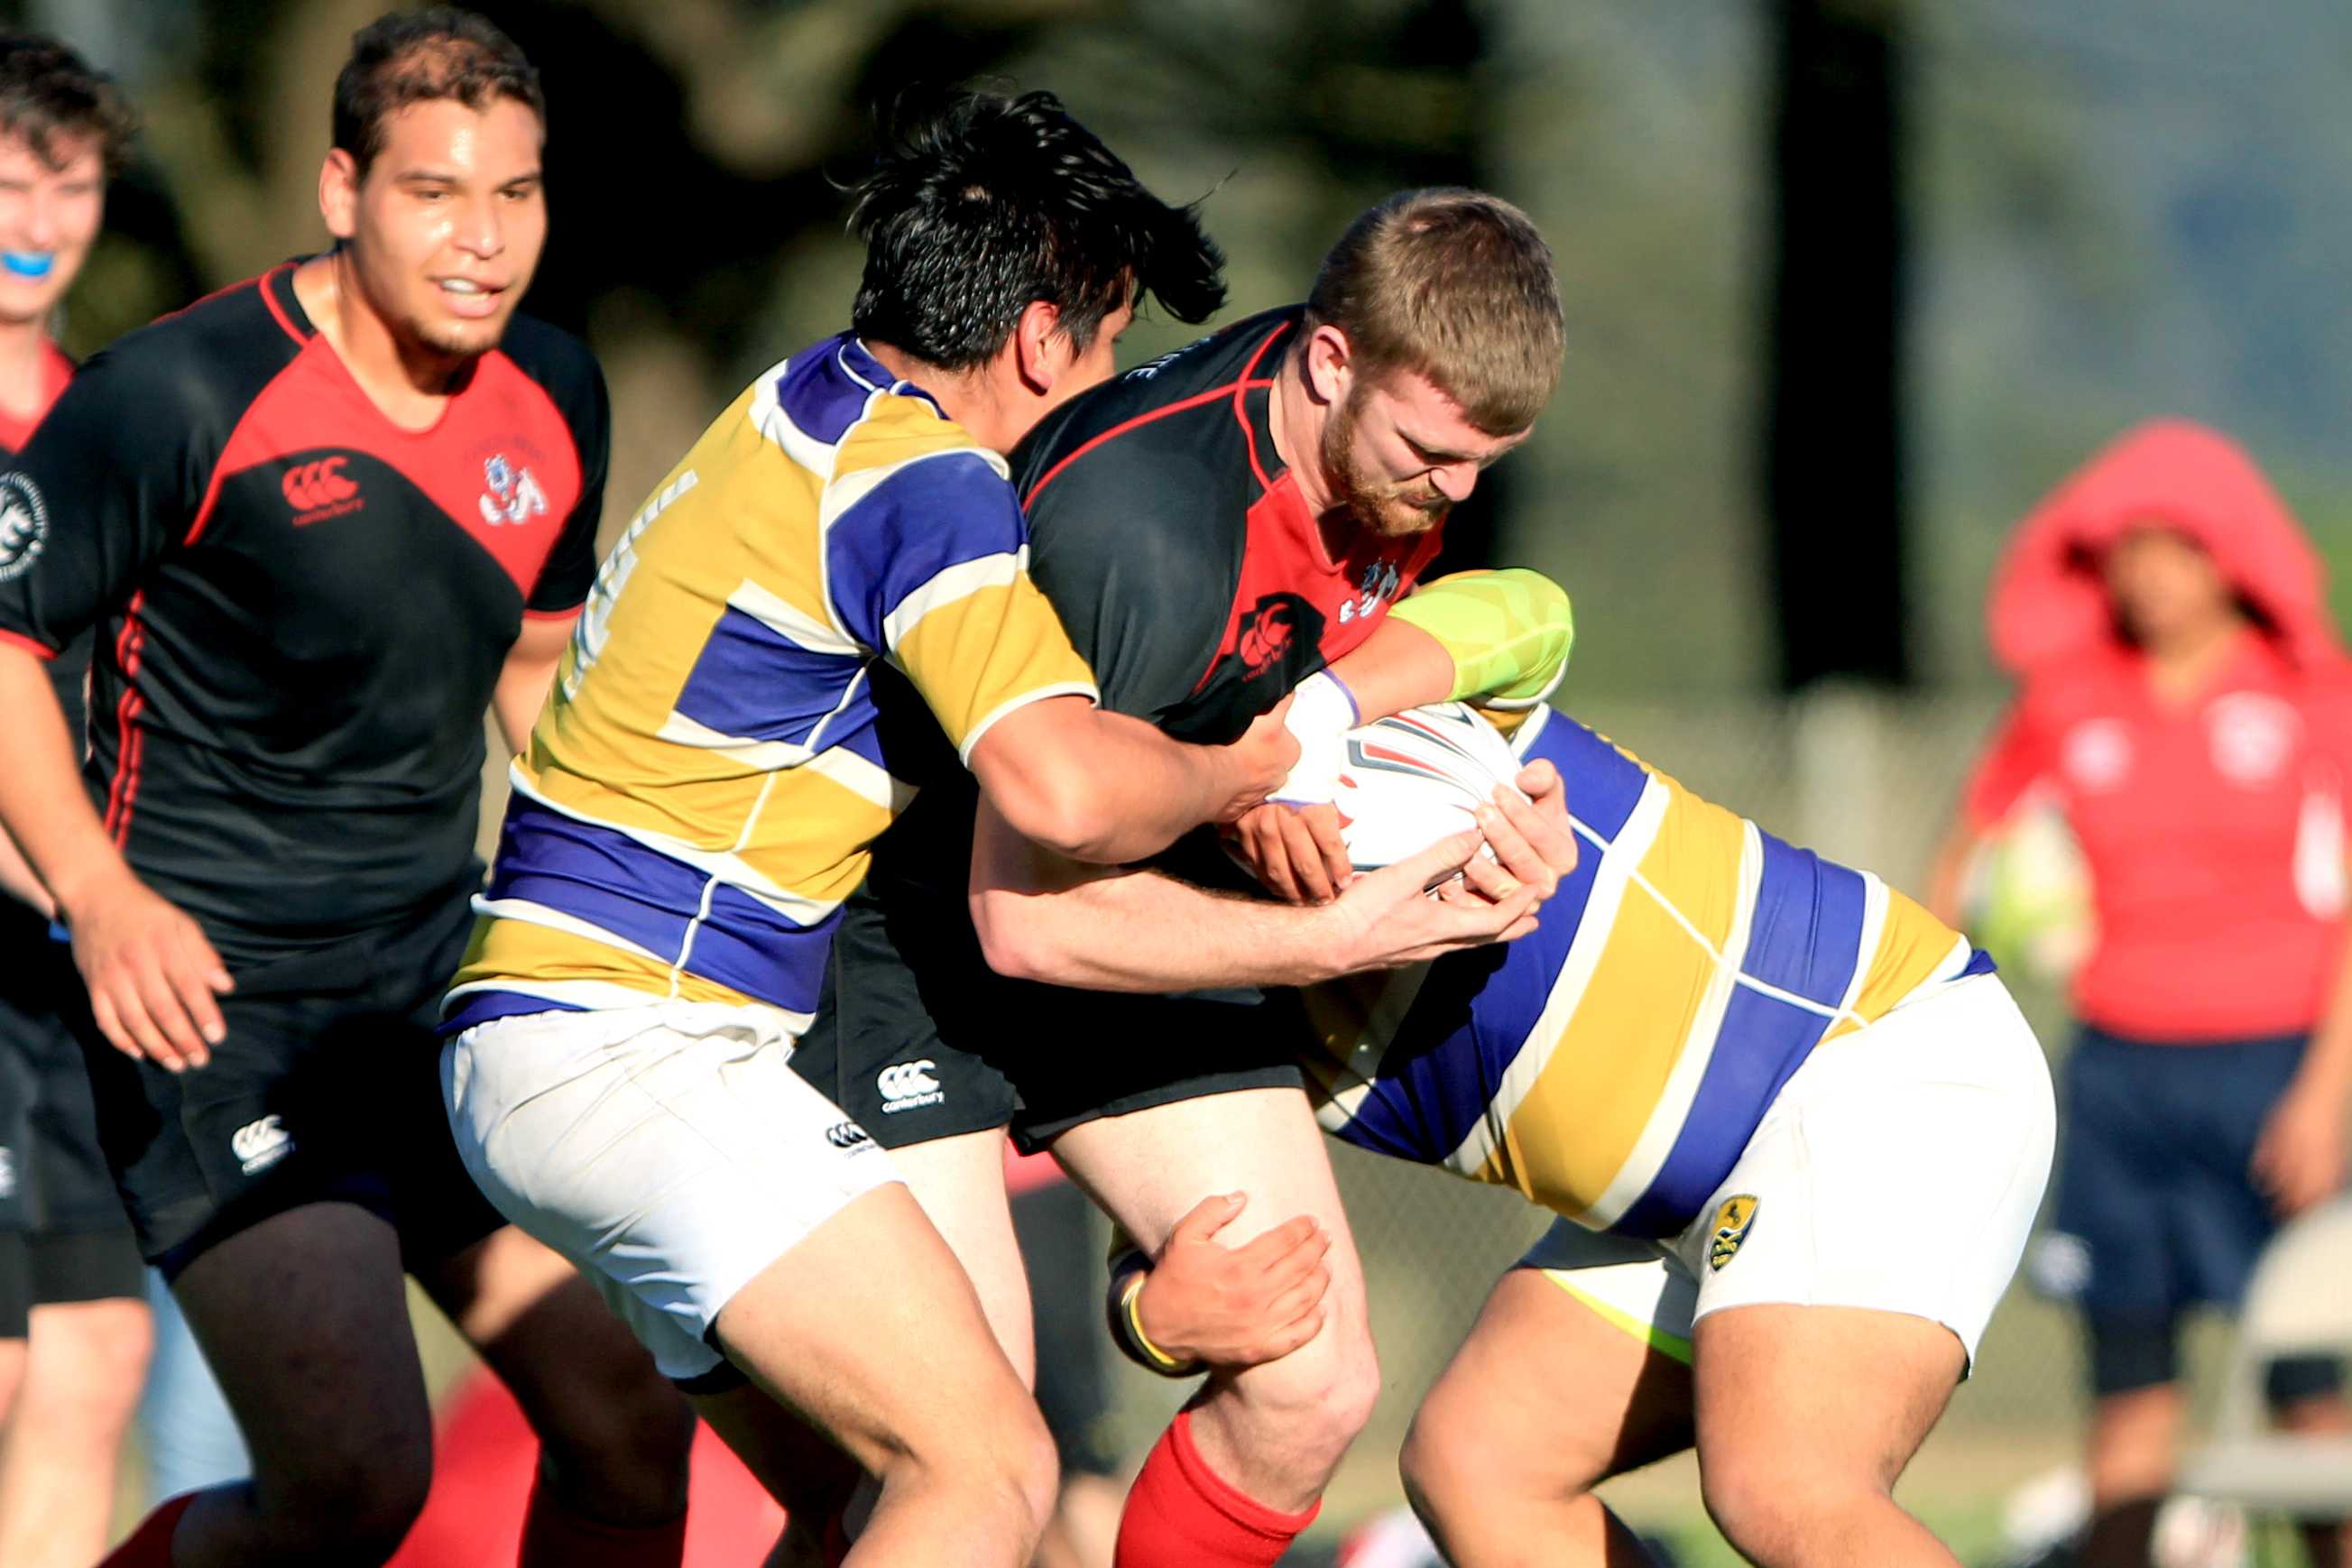 Fresno State lock Antonio Guerra (5) tries to escape a tackle during a rugby match against SF State at Gellert Field in Daly City, Calif., on Saturday, Feb. 3, 2018. (Christian Urrutia/Golden Gate Xpress)